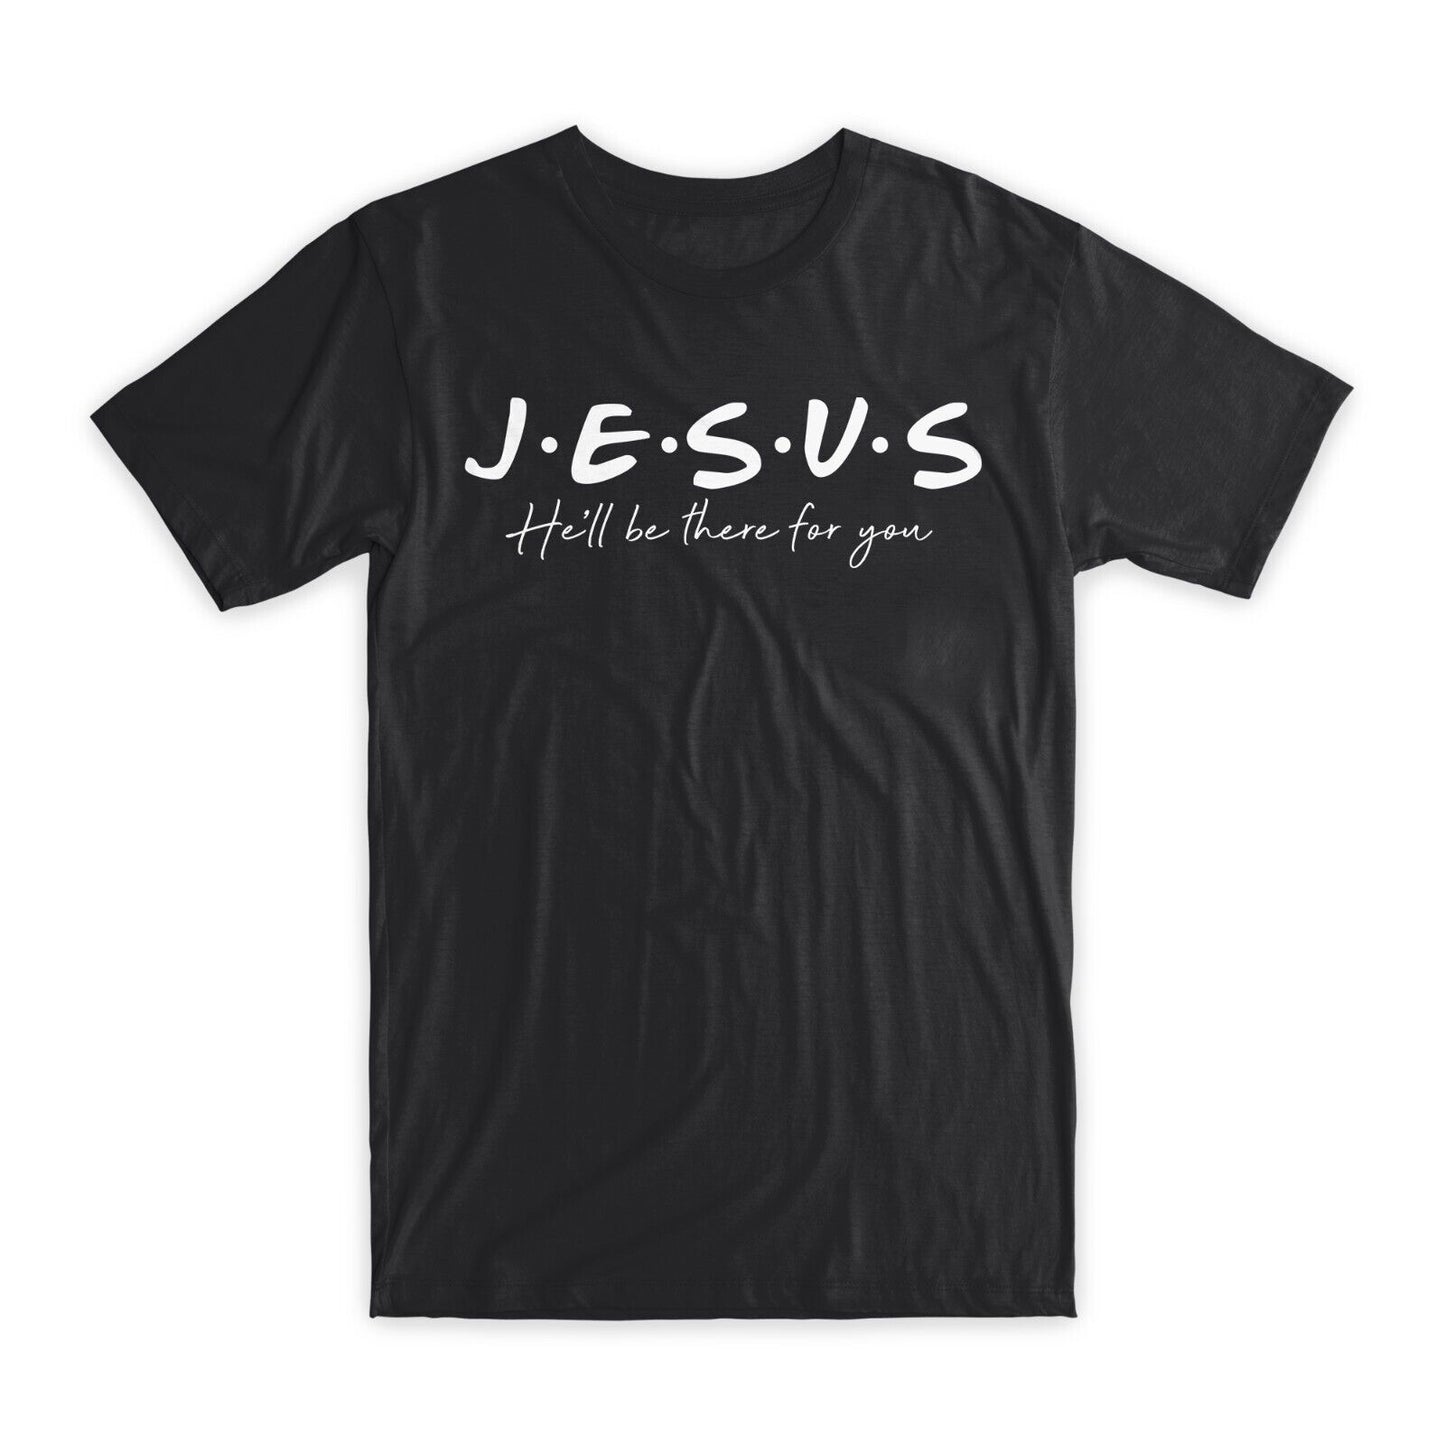 Jesus He'll Be There for You T-Shirt Premium Cotton Crew Neck Funny Tee Gift NEW